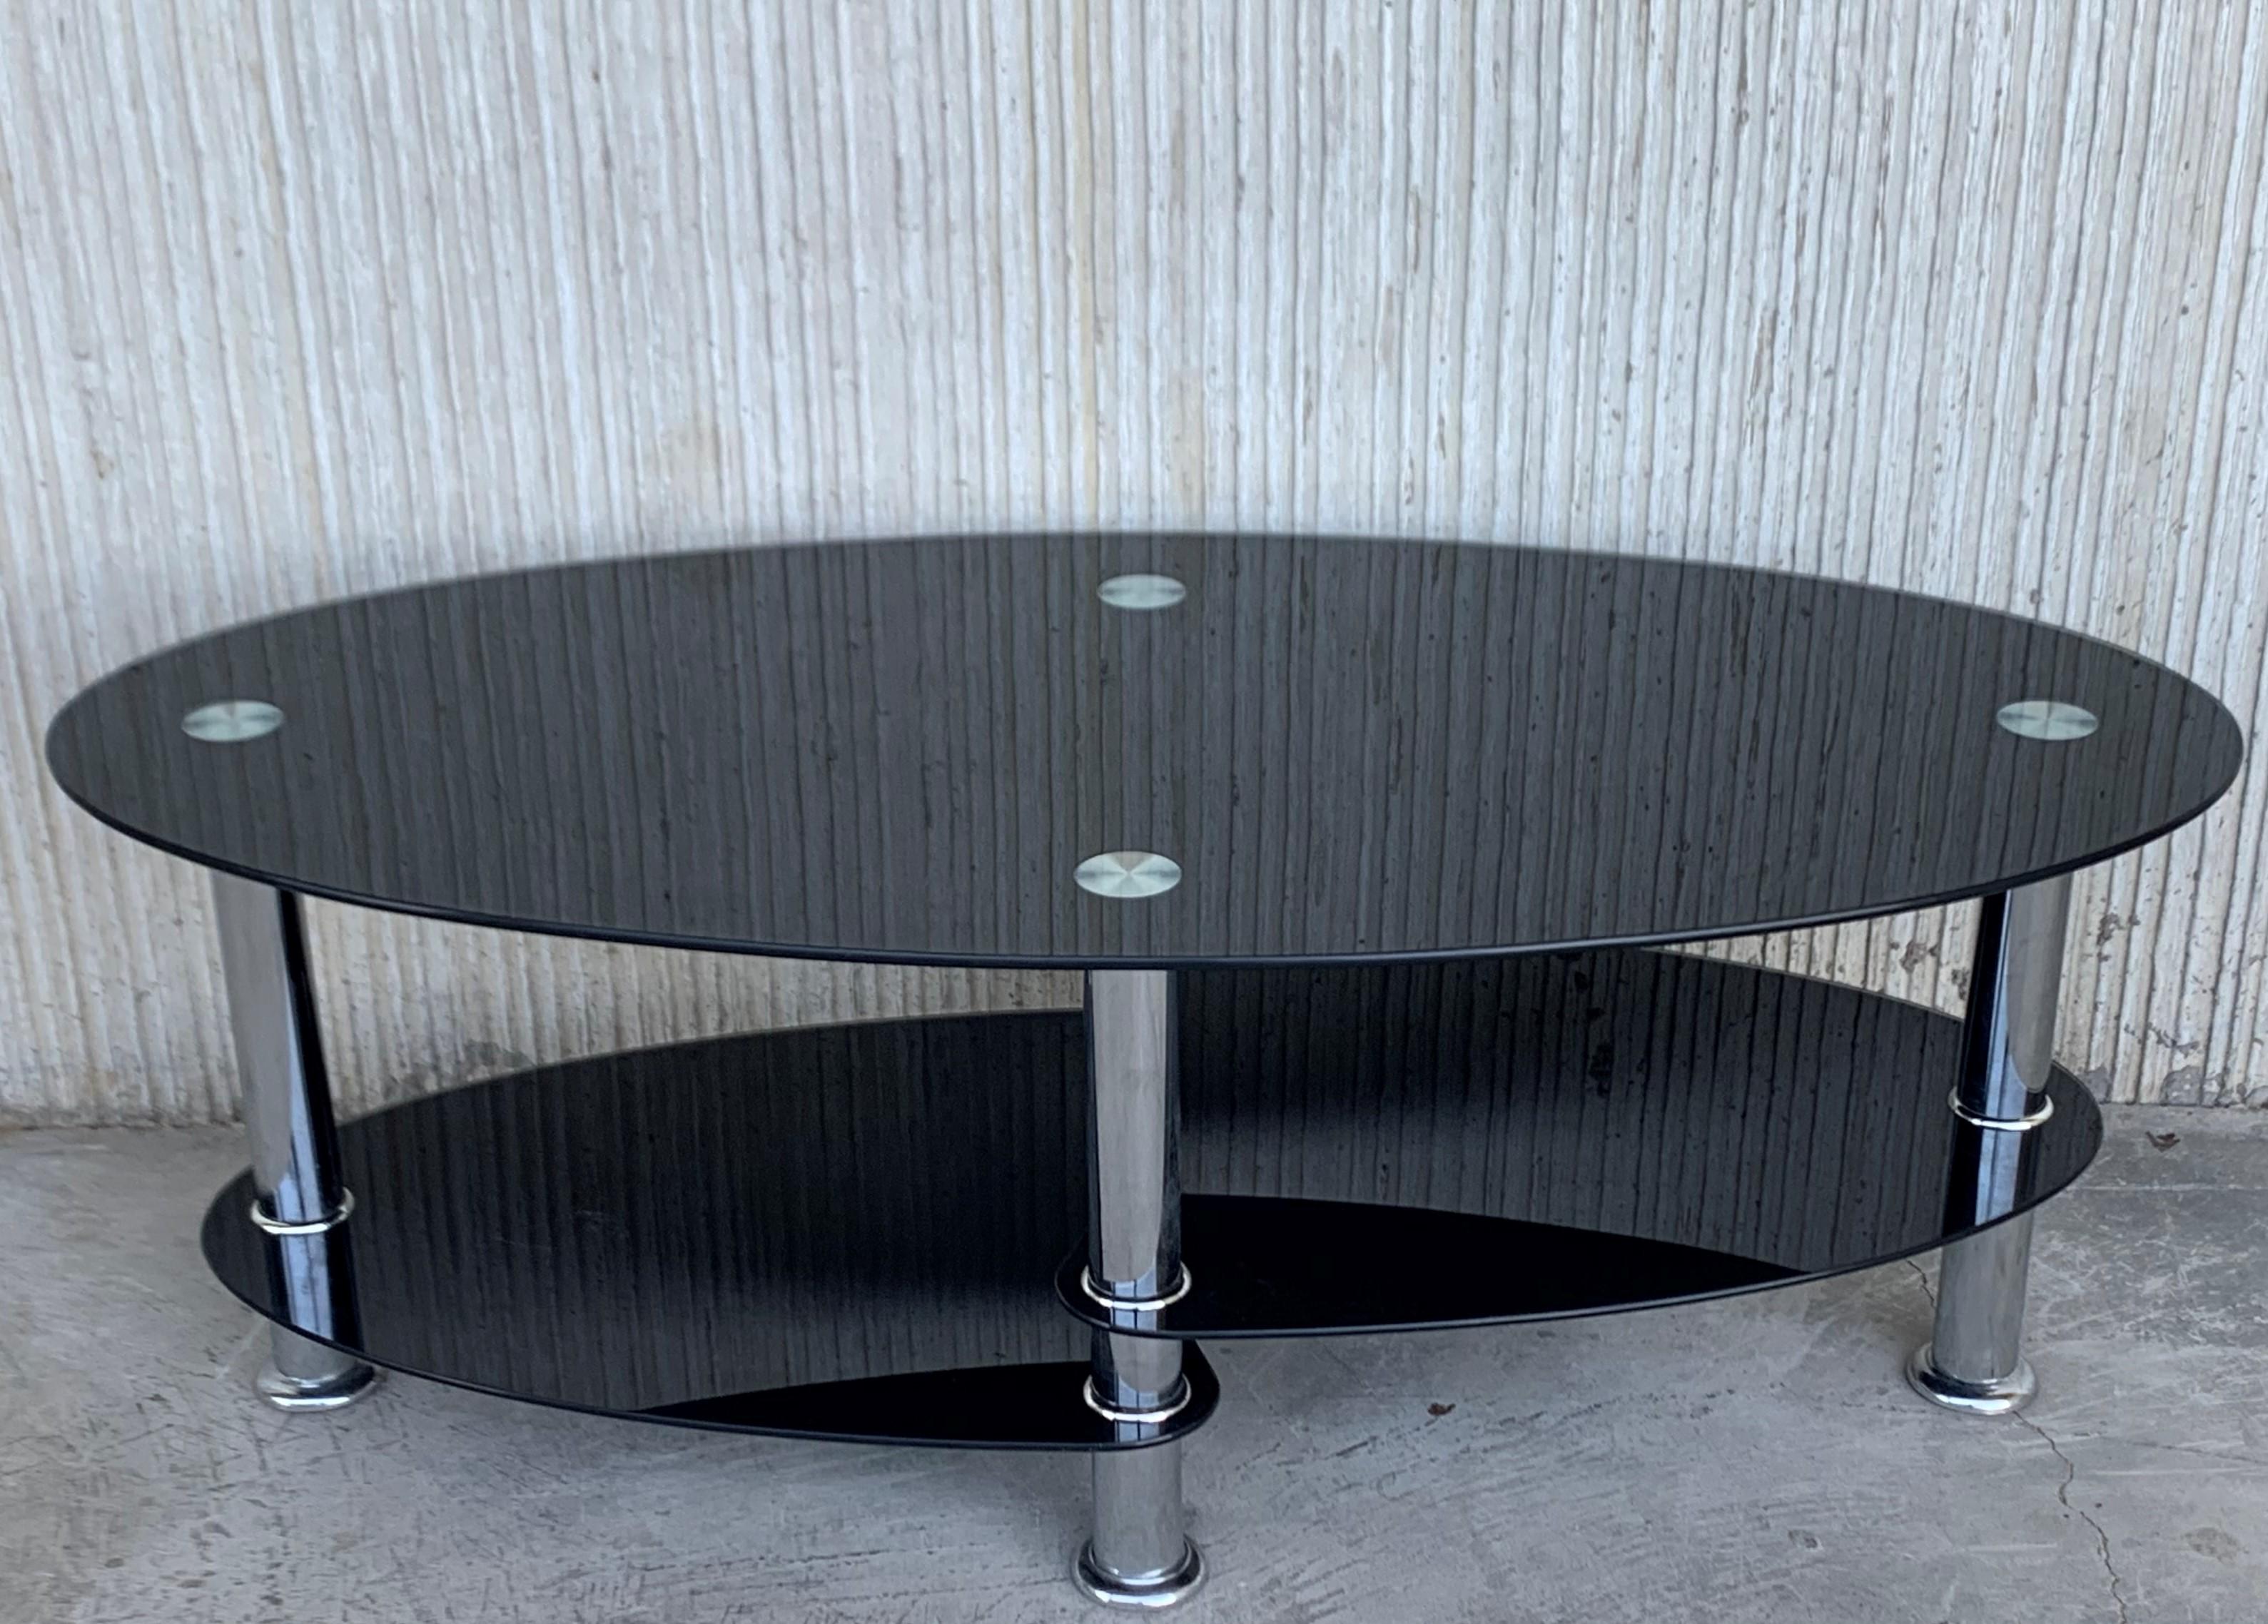 Midcentury oval Art Deco center table in black glass tops and chrome

It has two shelves in different heights:
Measures: Total height: 17.32in
Medium shelve: 7.48in
Low shelve: 4.92in.